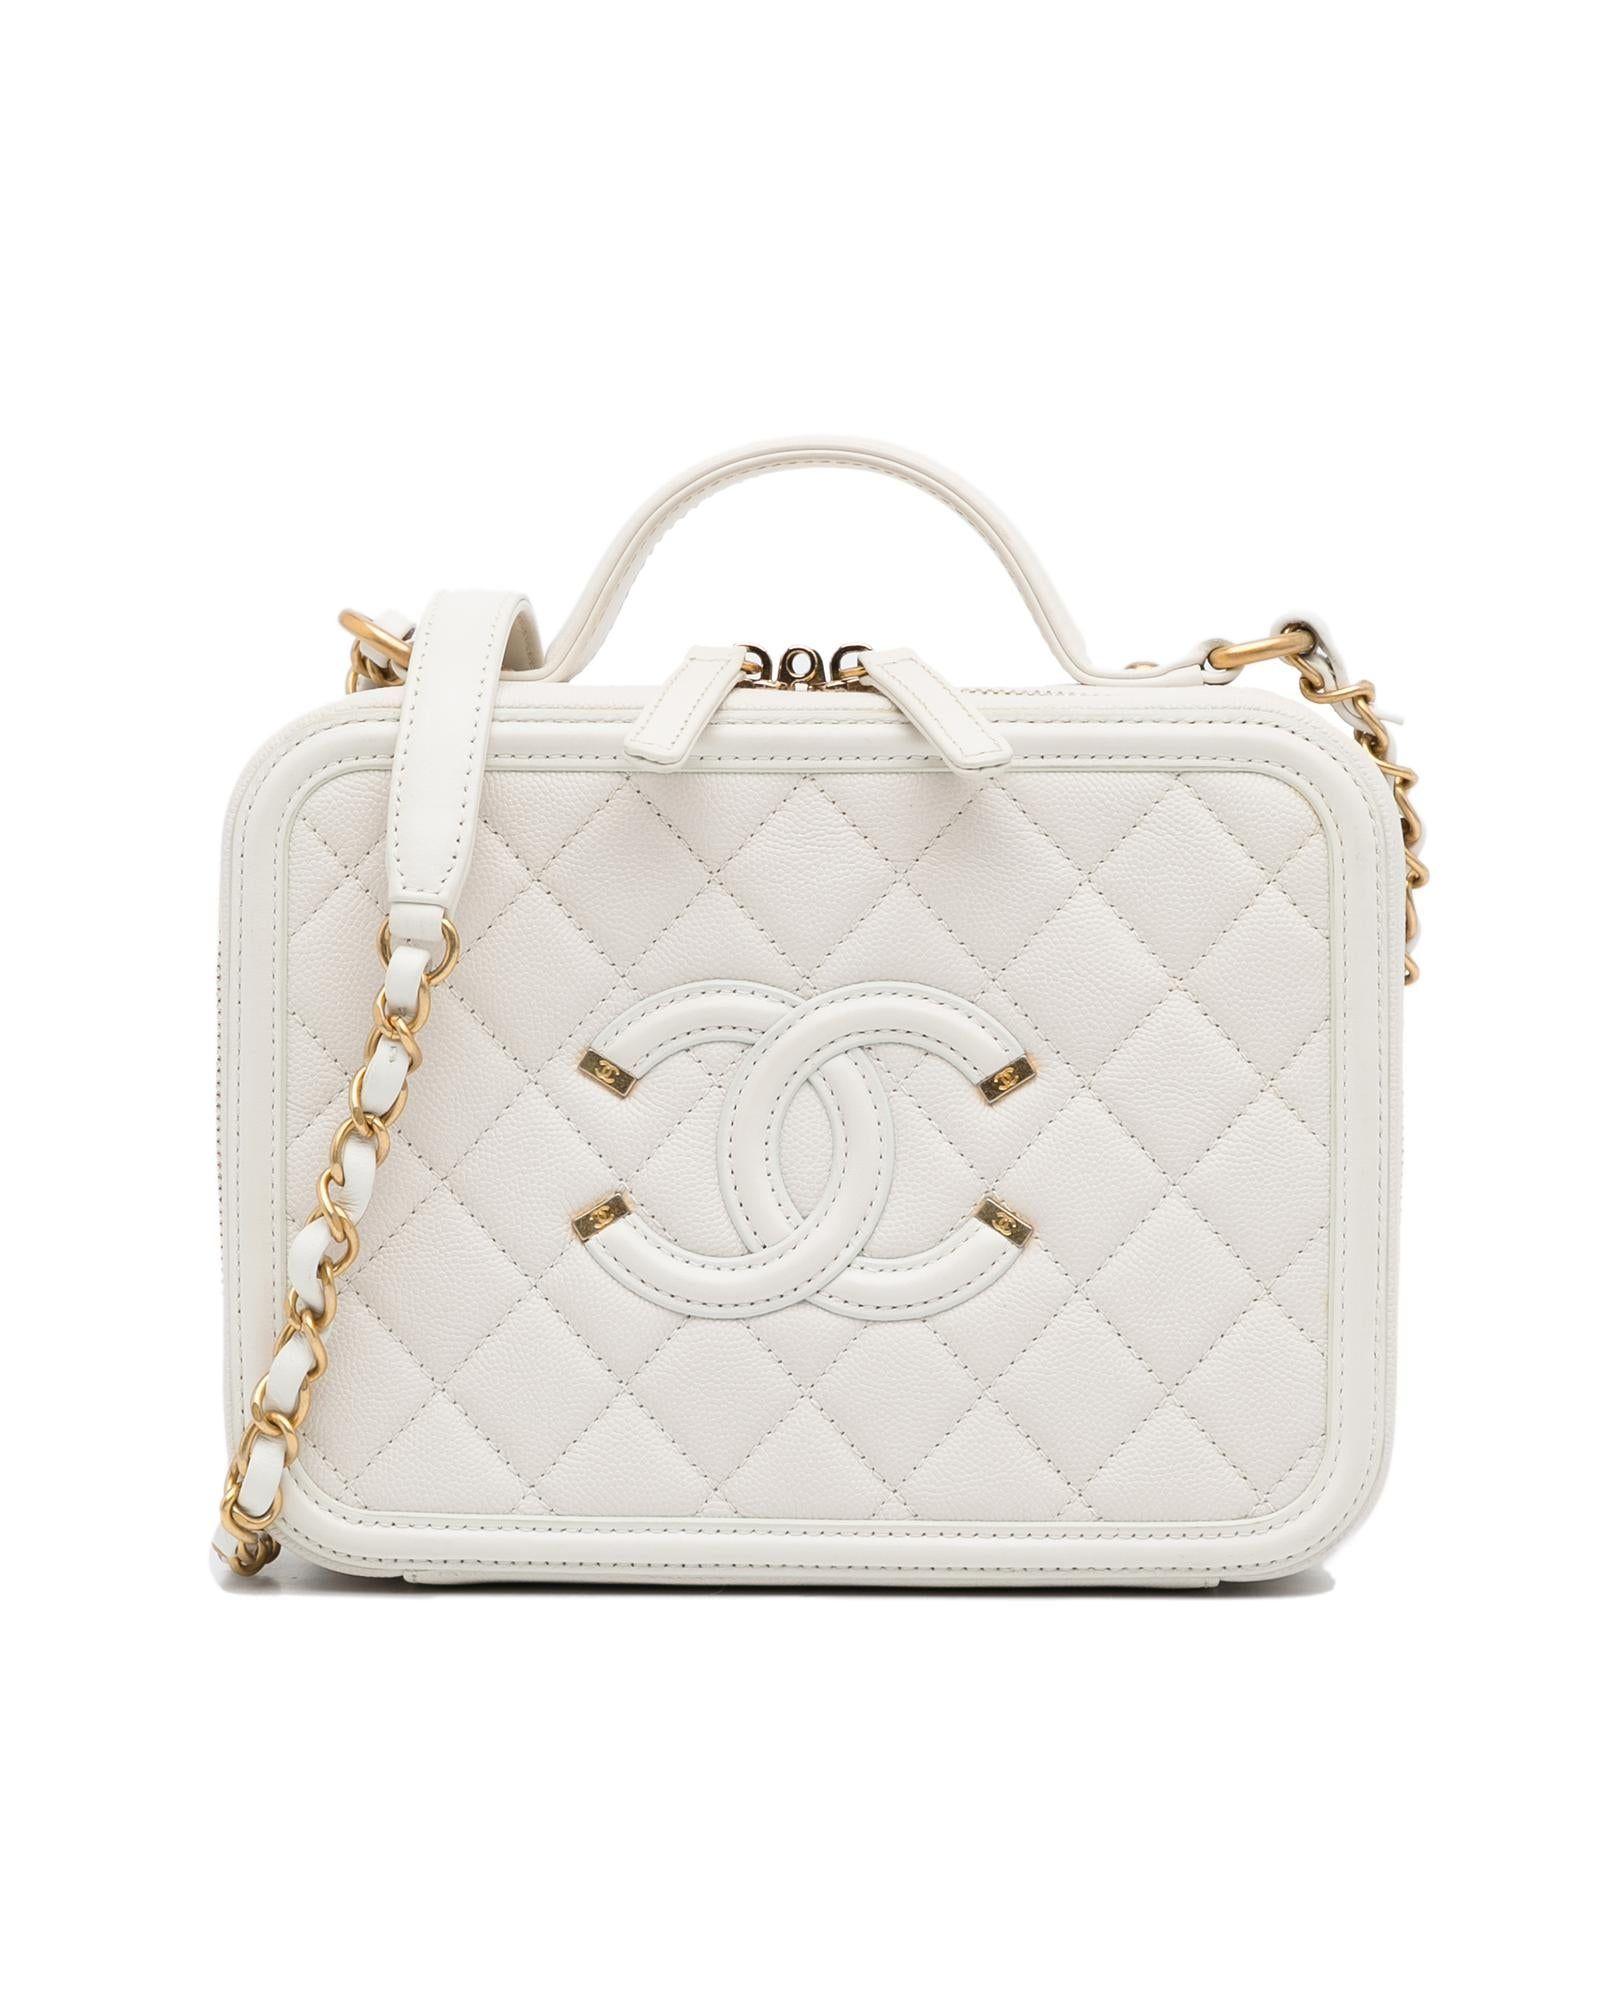 Chanel Quilted Leather Vanity Satchel in Natural